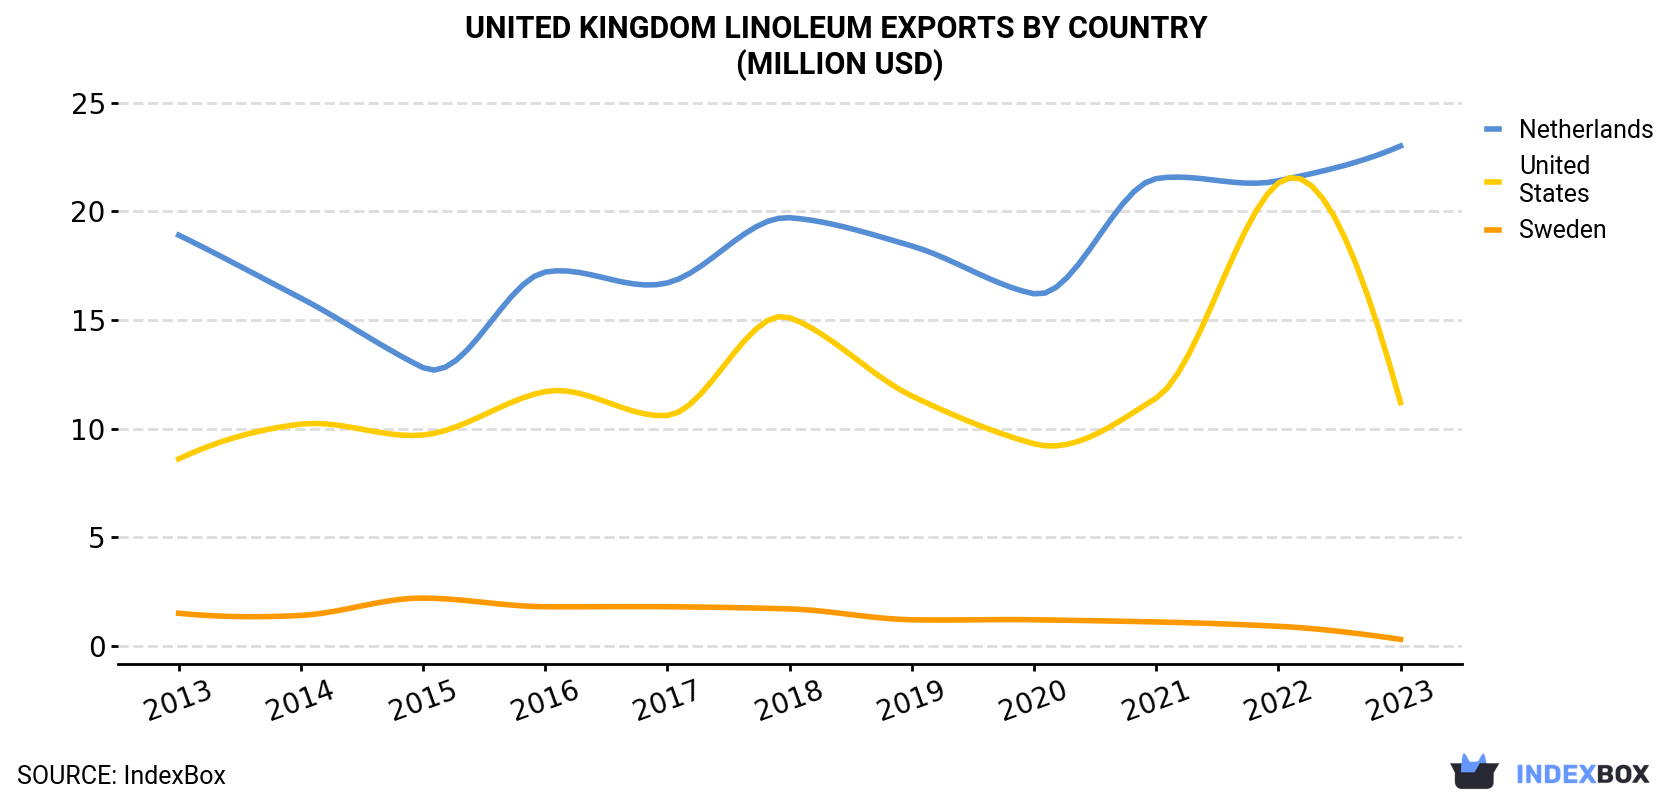 United Kingdom Linoleum Exports By Country (Million USD)